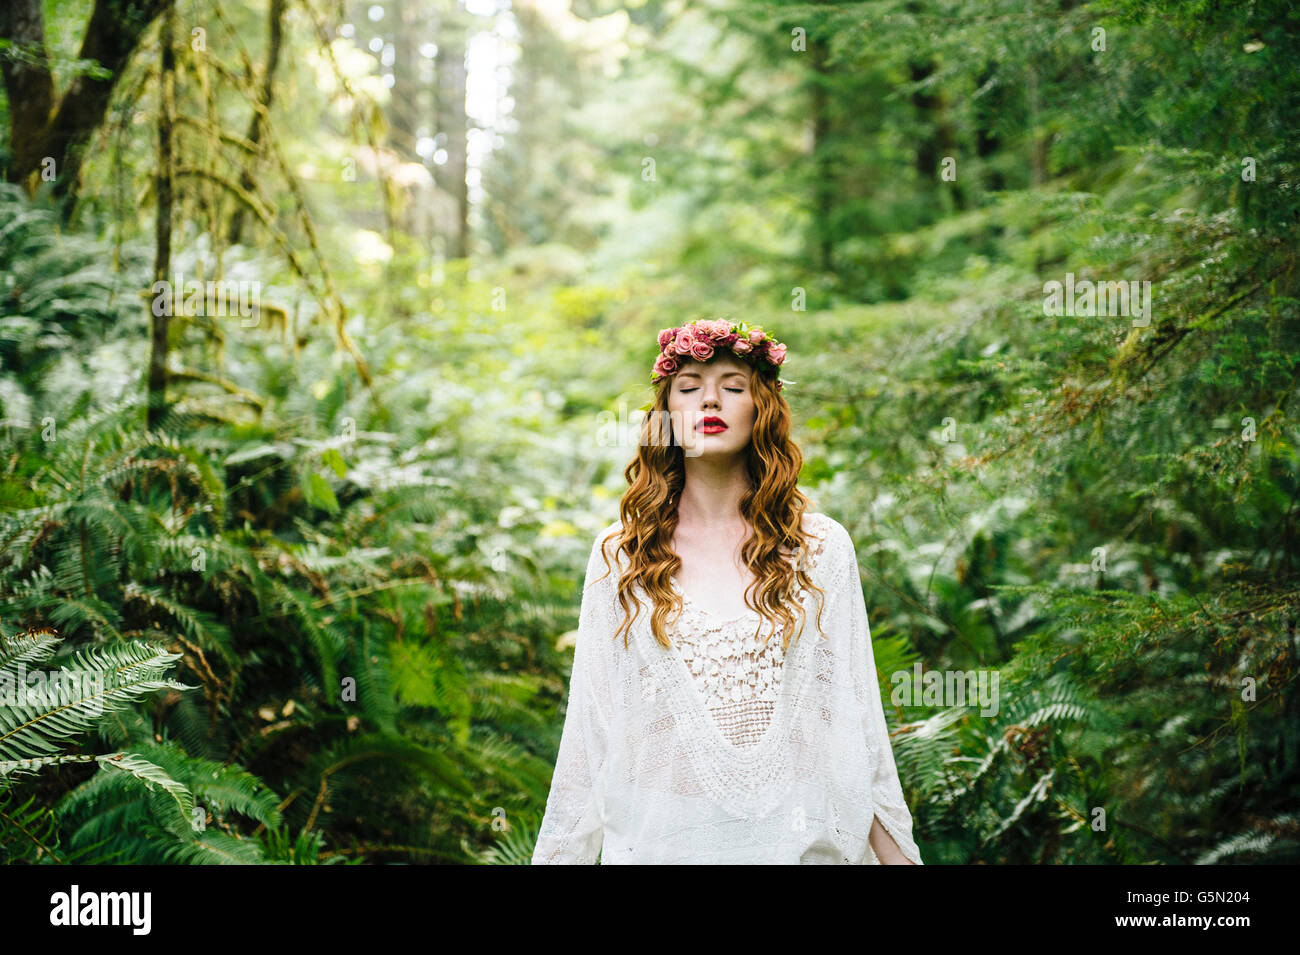 Caucasian woman wearing flower crown in forest Banque D'Images